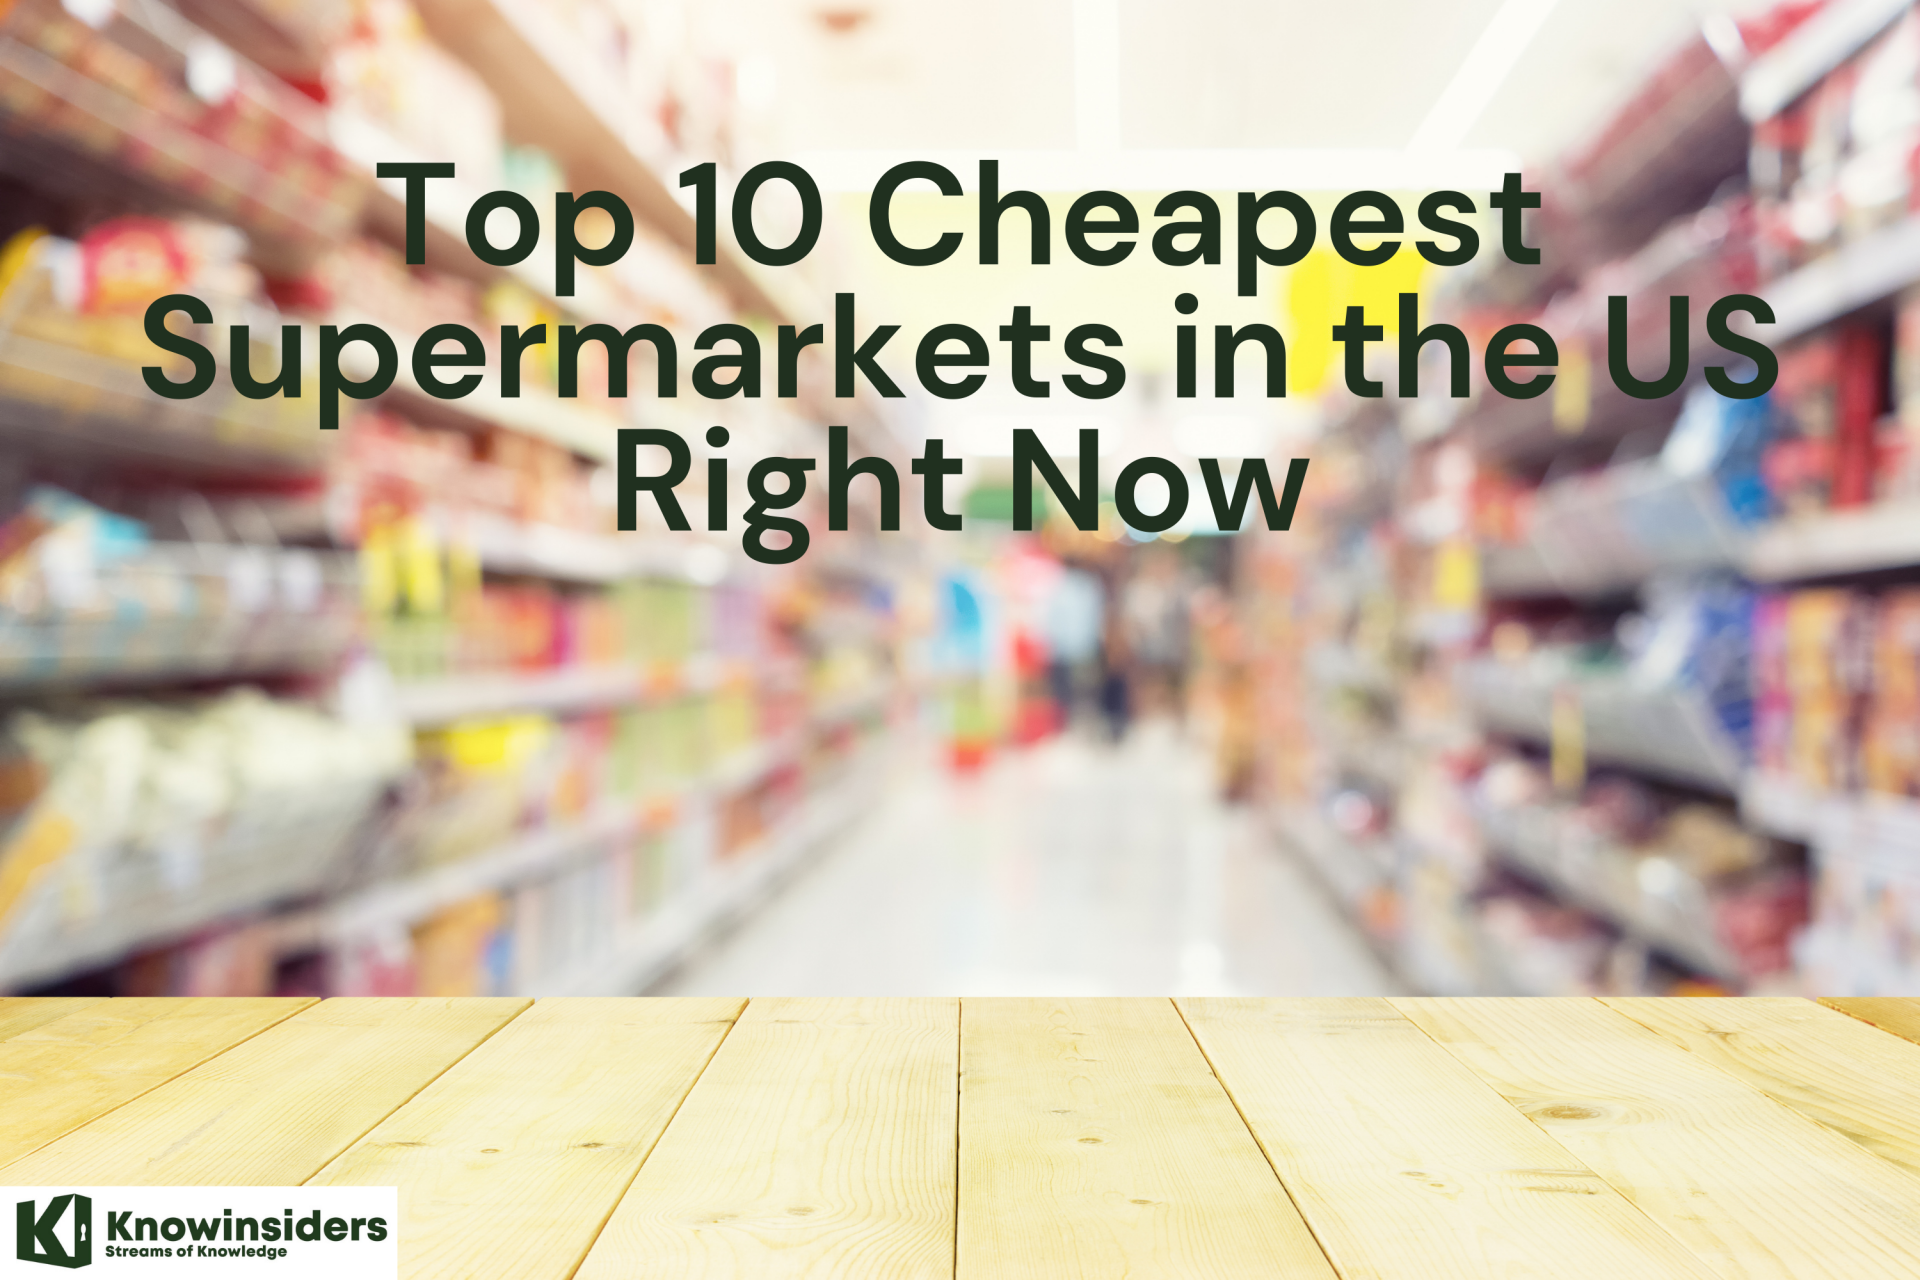 Top 10 Cheapest Supermarkets in the US